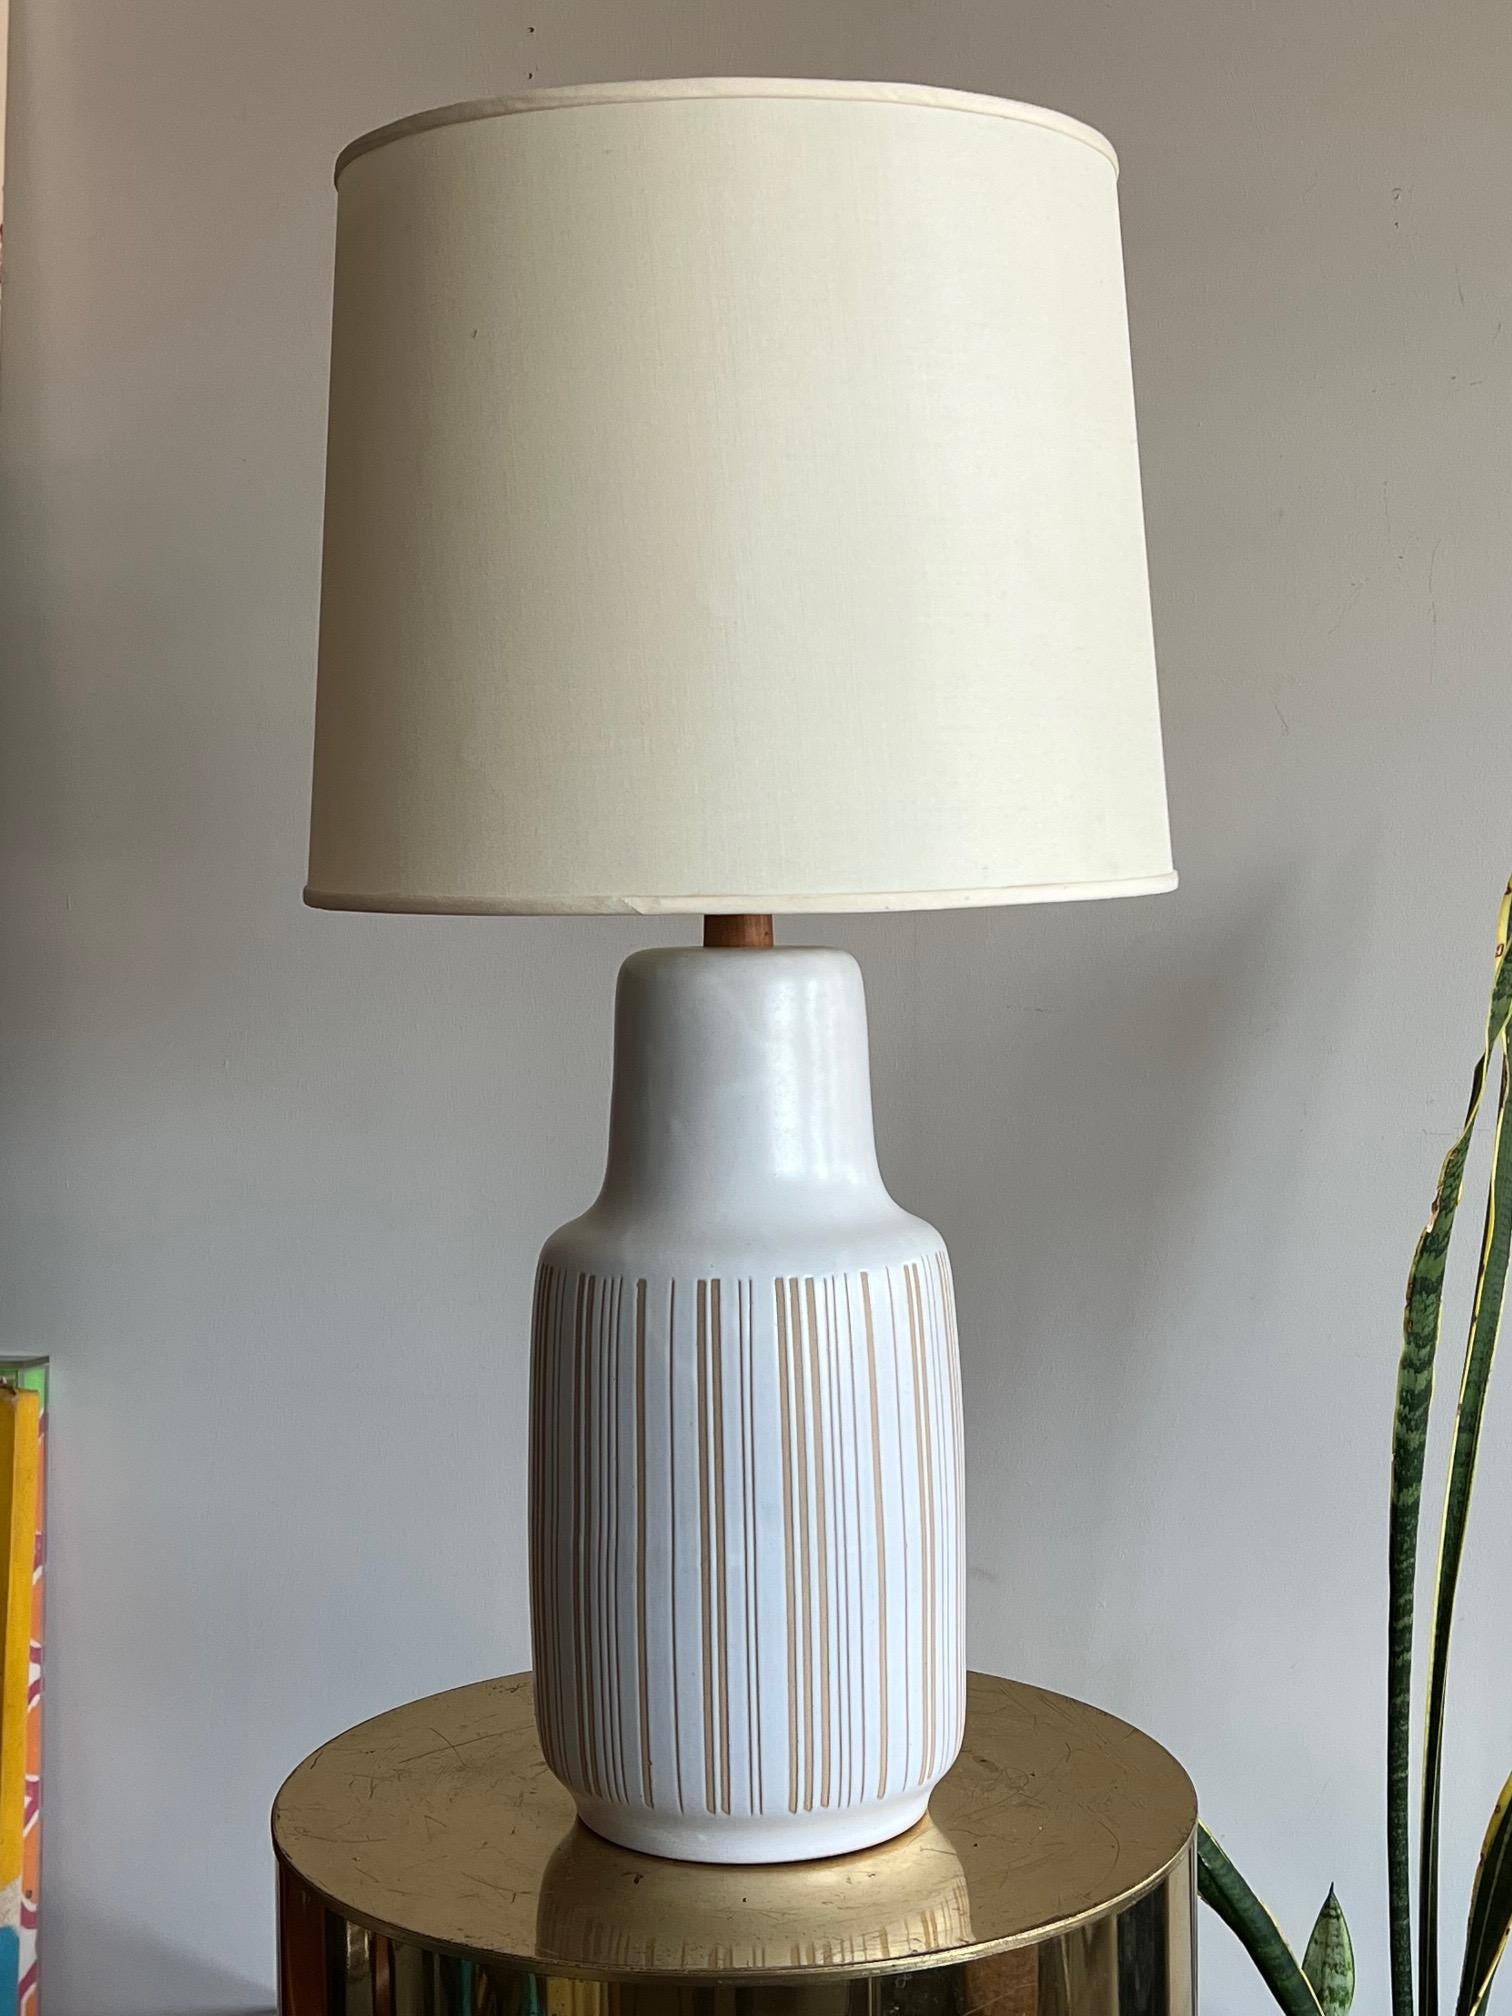 An elegant, large scale Martz lamp with vertical line decoration. Teak neck, electrified with a three way switch.